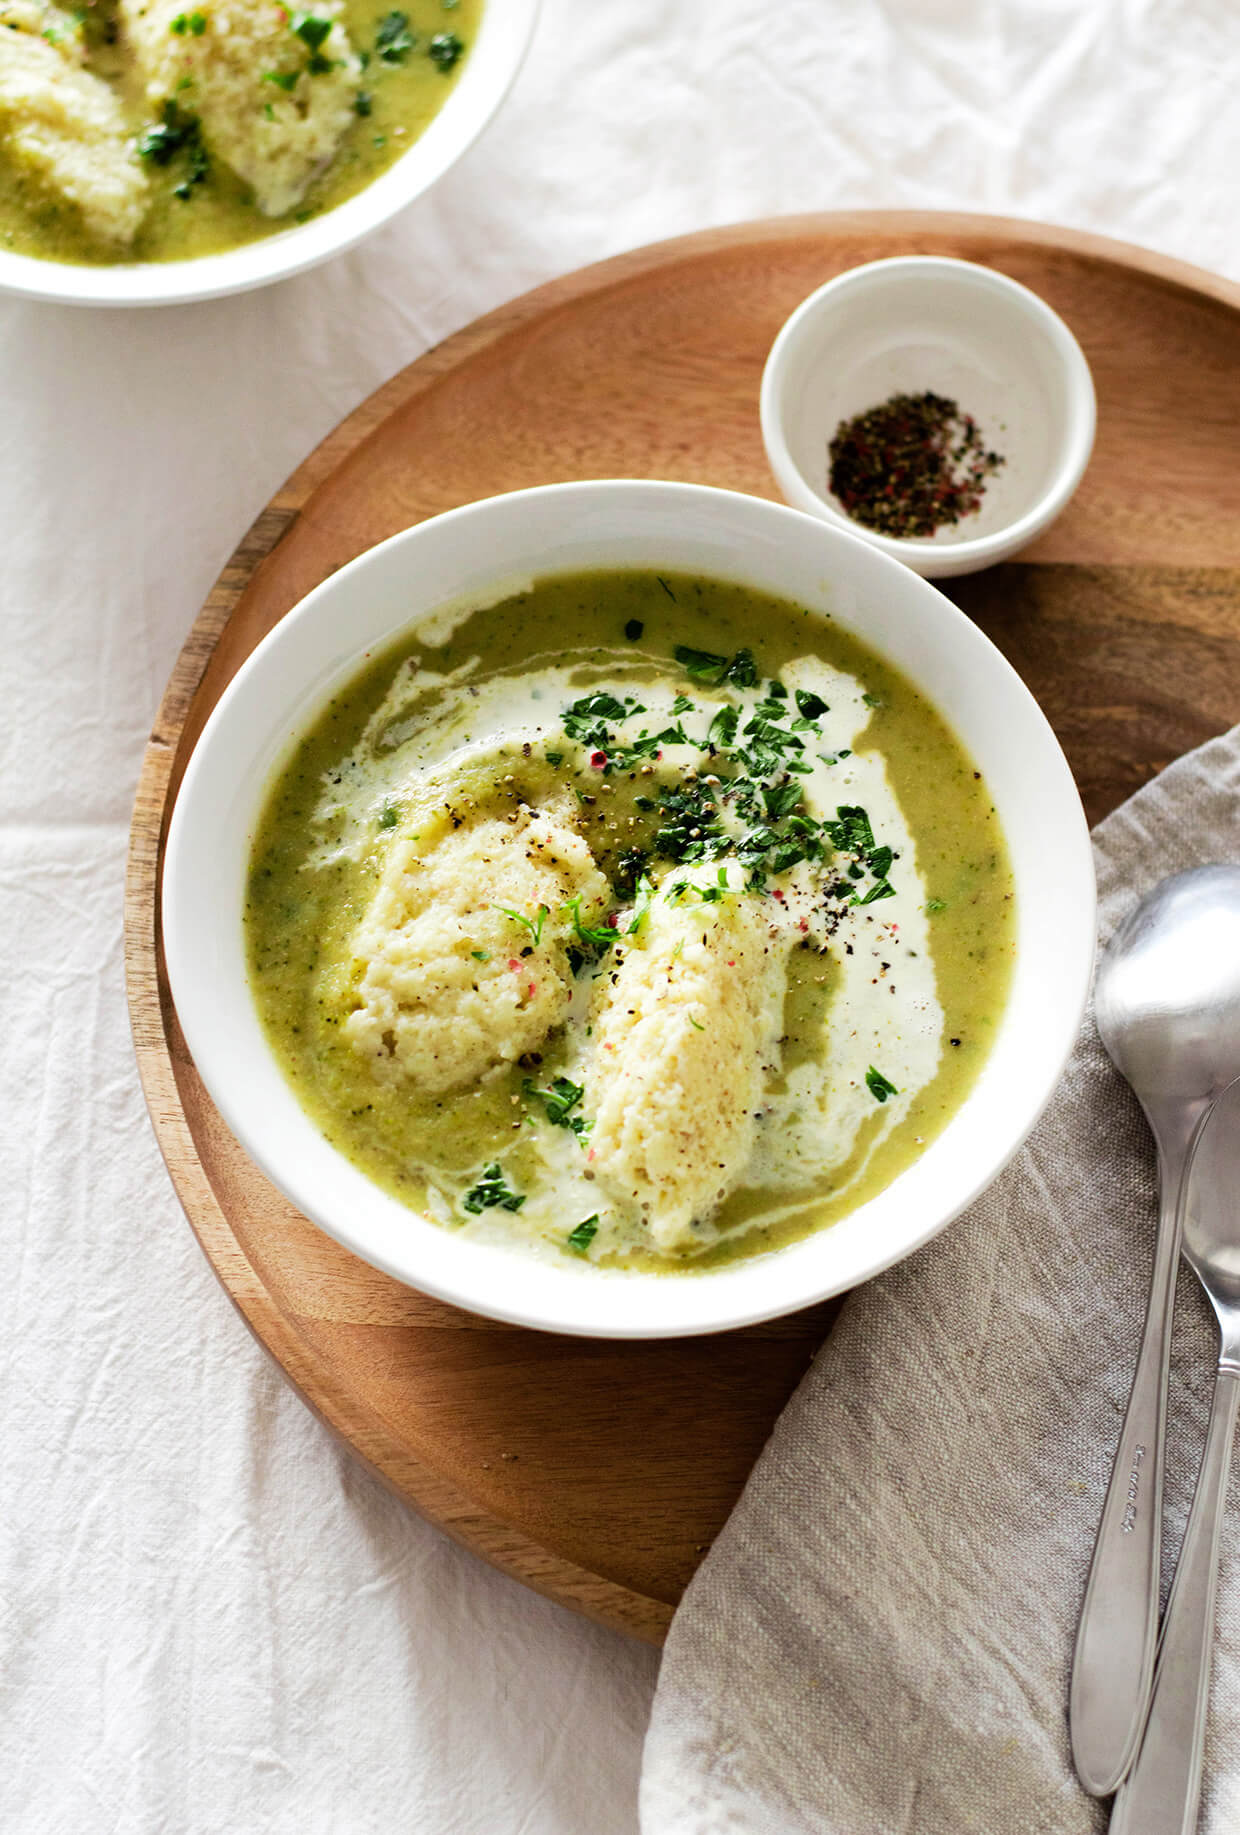 Vegan creamy broccoli soup with semolina dumplings is the perfect meal for cold weather! Done in under 60 minutes!